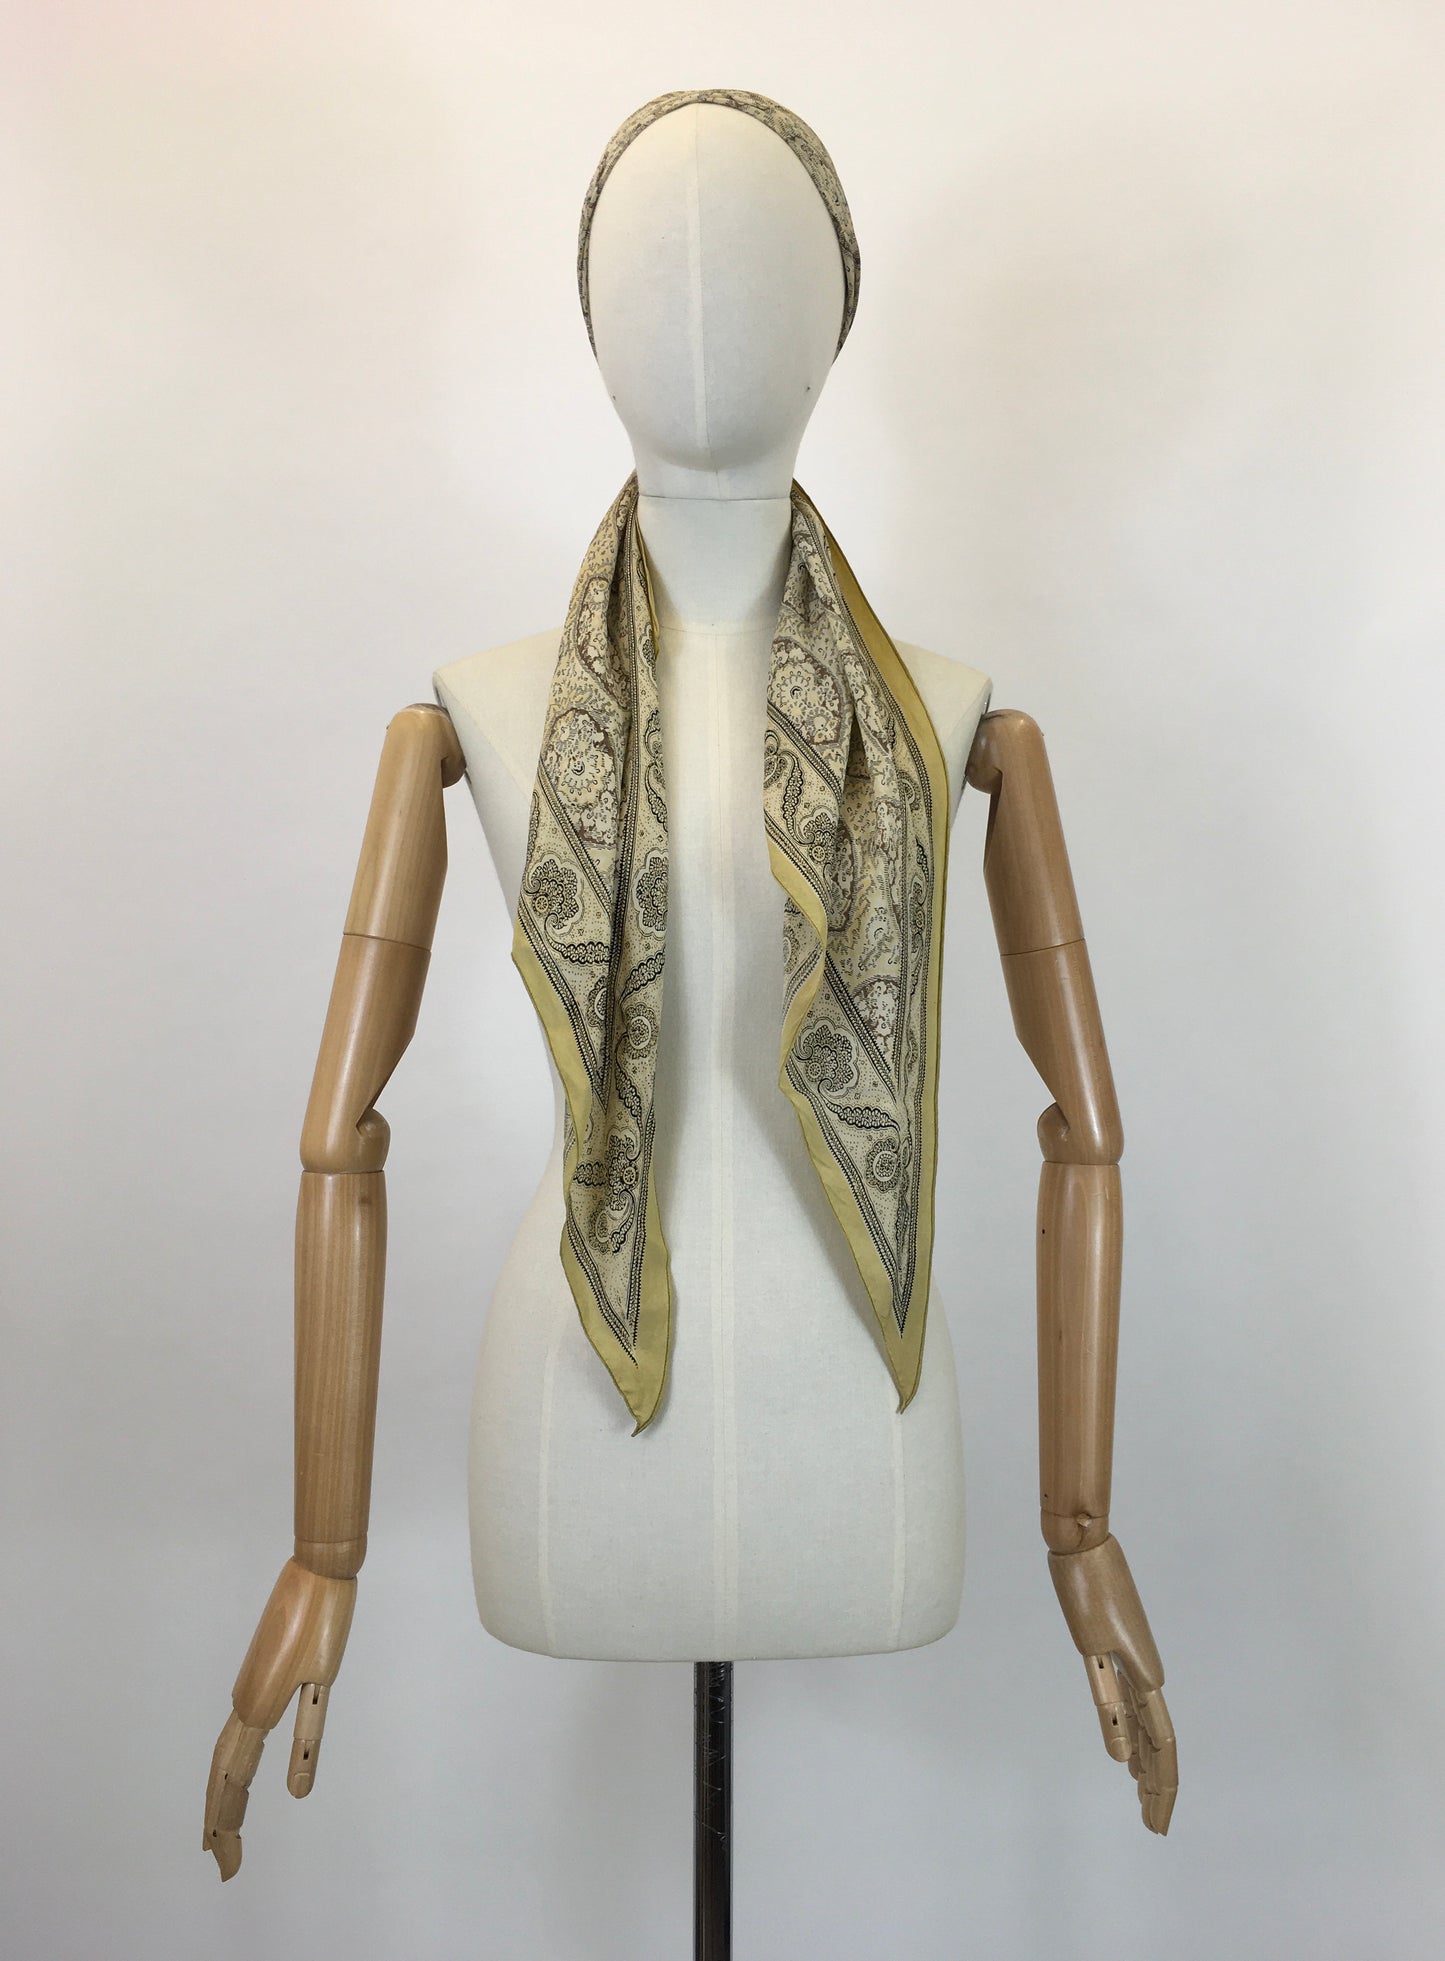 Original 1930s Darling Deco Dagger point scarf - In lemons, taupe, brown and black.